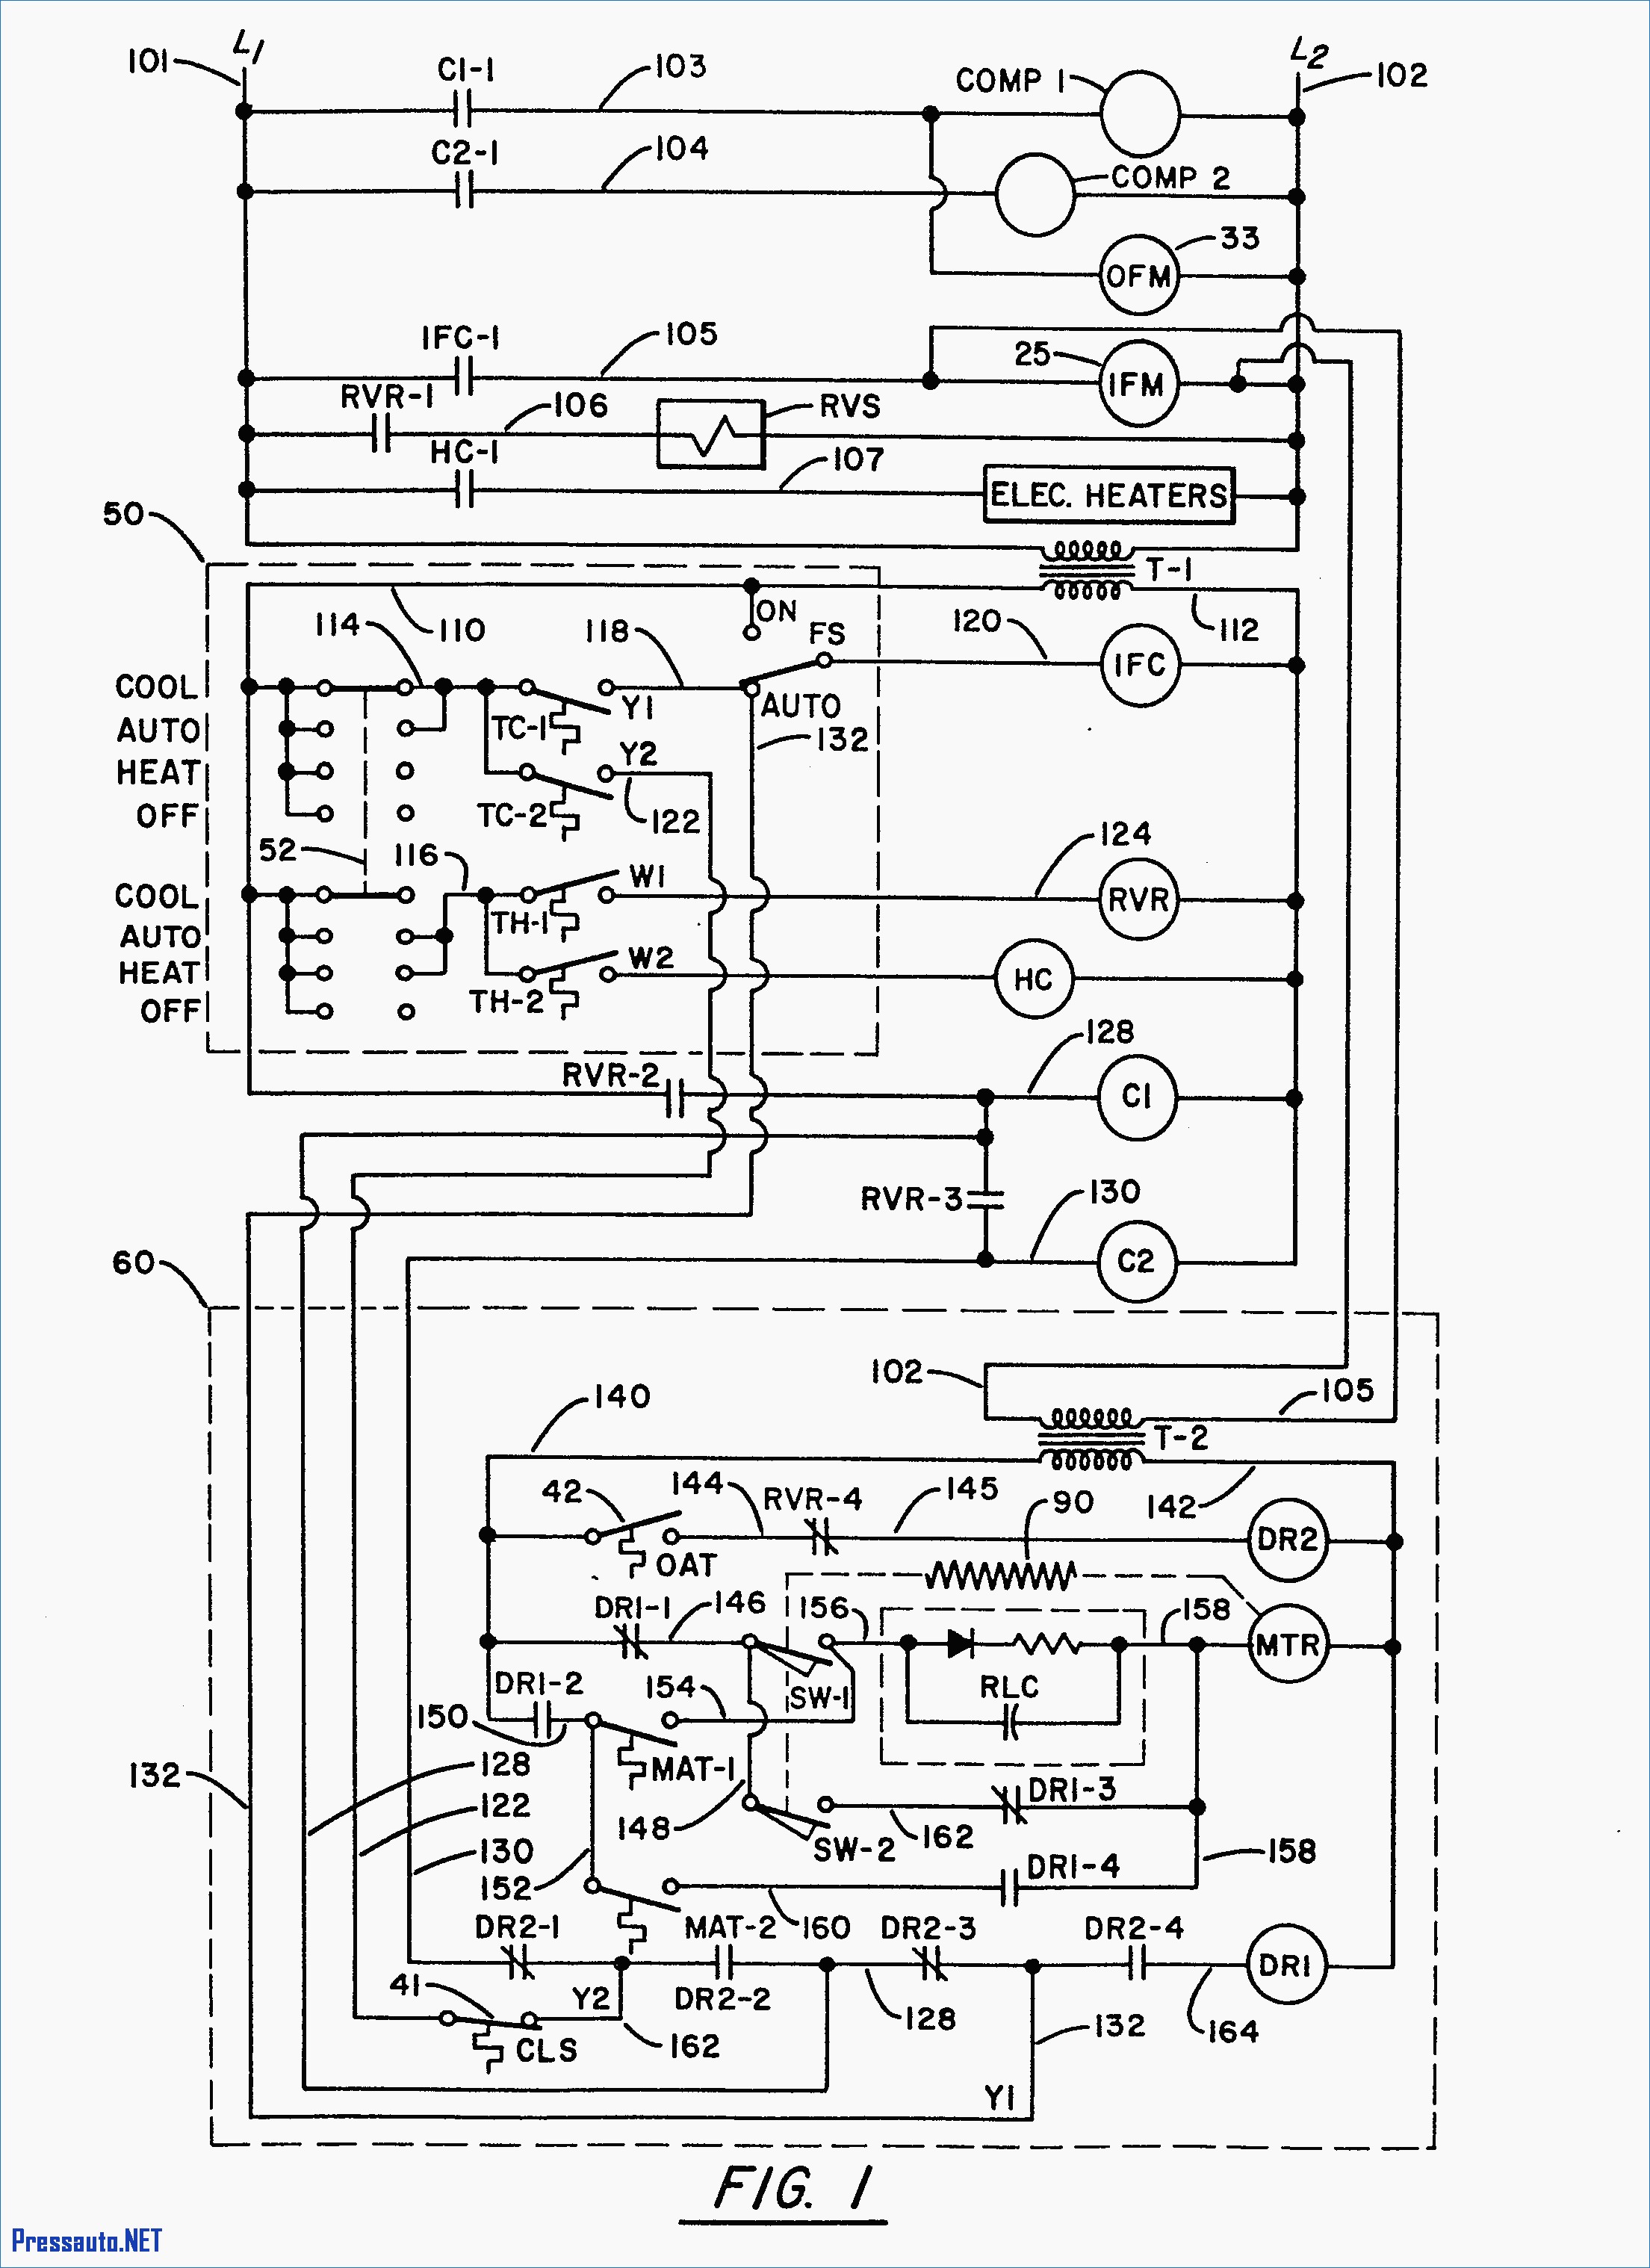 Thermostat Thermostat Wiring Diagram Air Conditioner Beautiful Old Furnace Wiring Diagram Old Carrier Wiring Diagrams Hvac